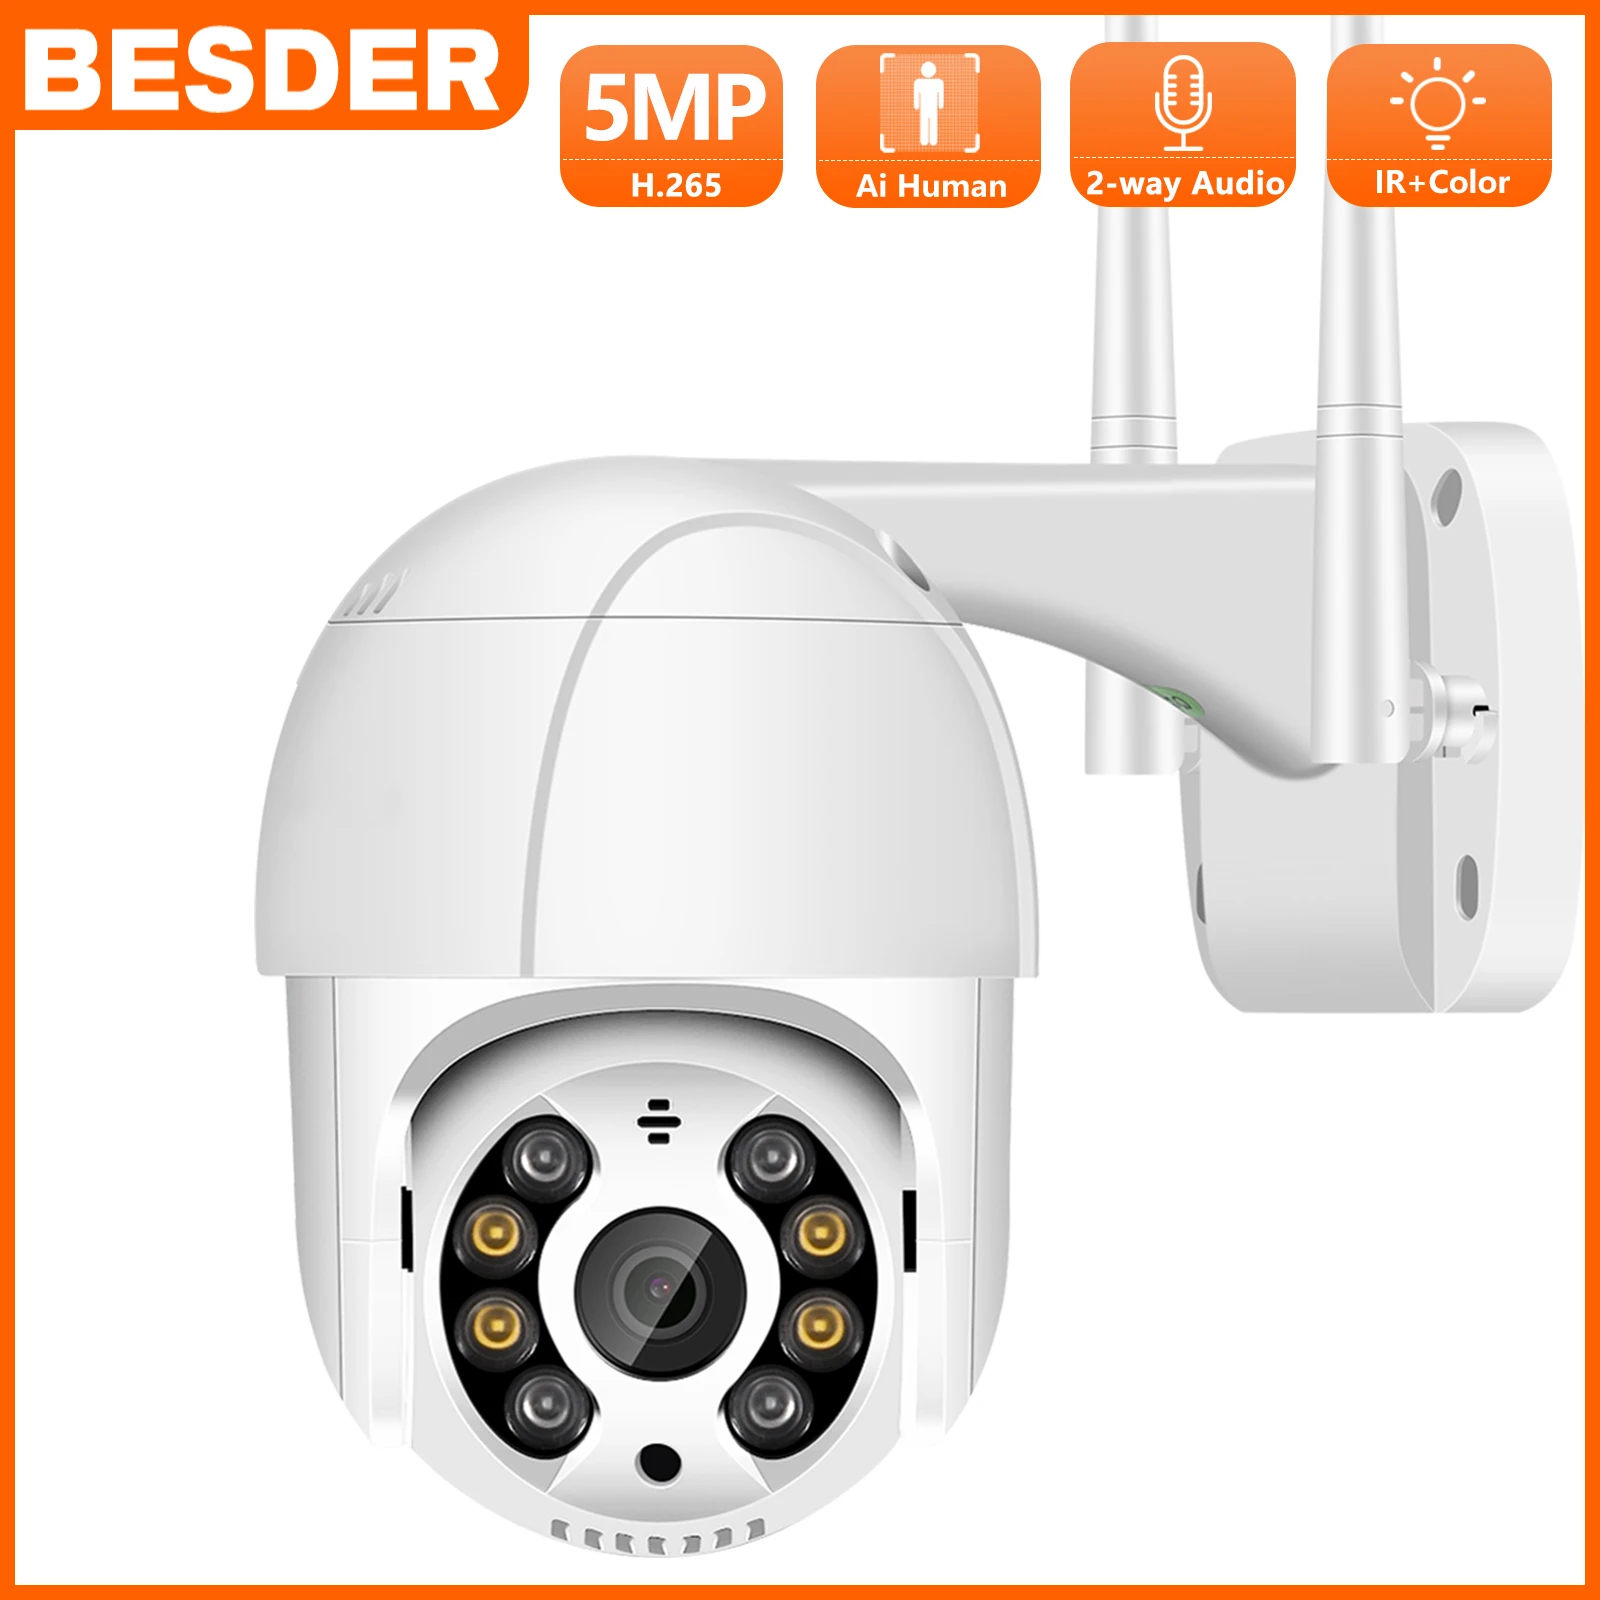 BESDER 5MP 3MP FHD WiFi Camera Humanoid Detection Auto Tracking CCTV IP Camera 2MP Color IR Night Vision SD Card Cloud Storage